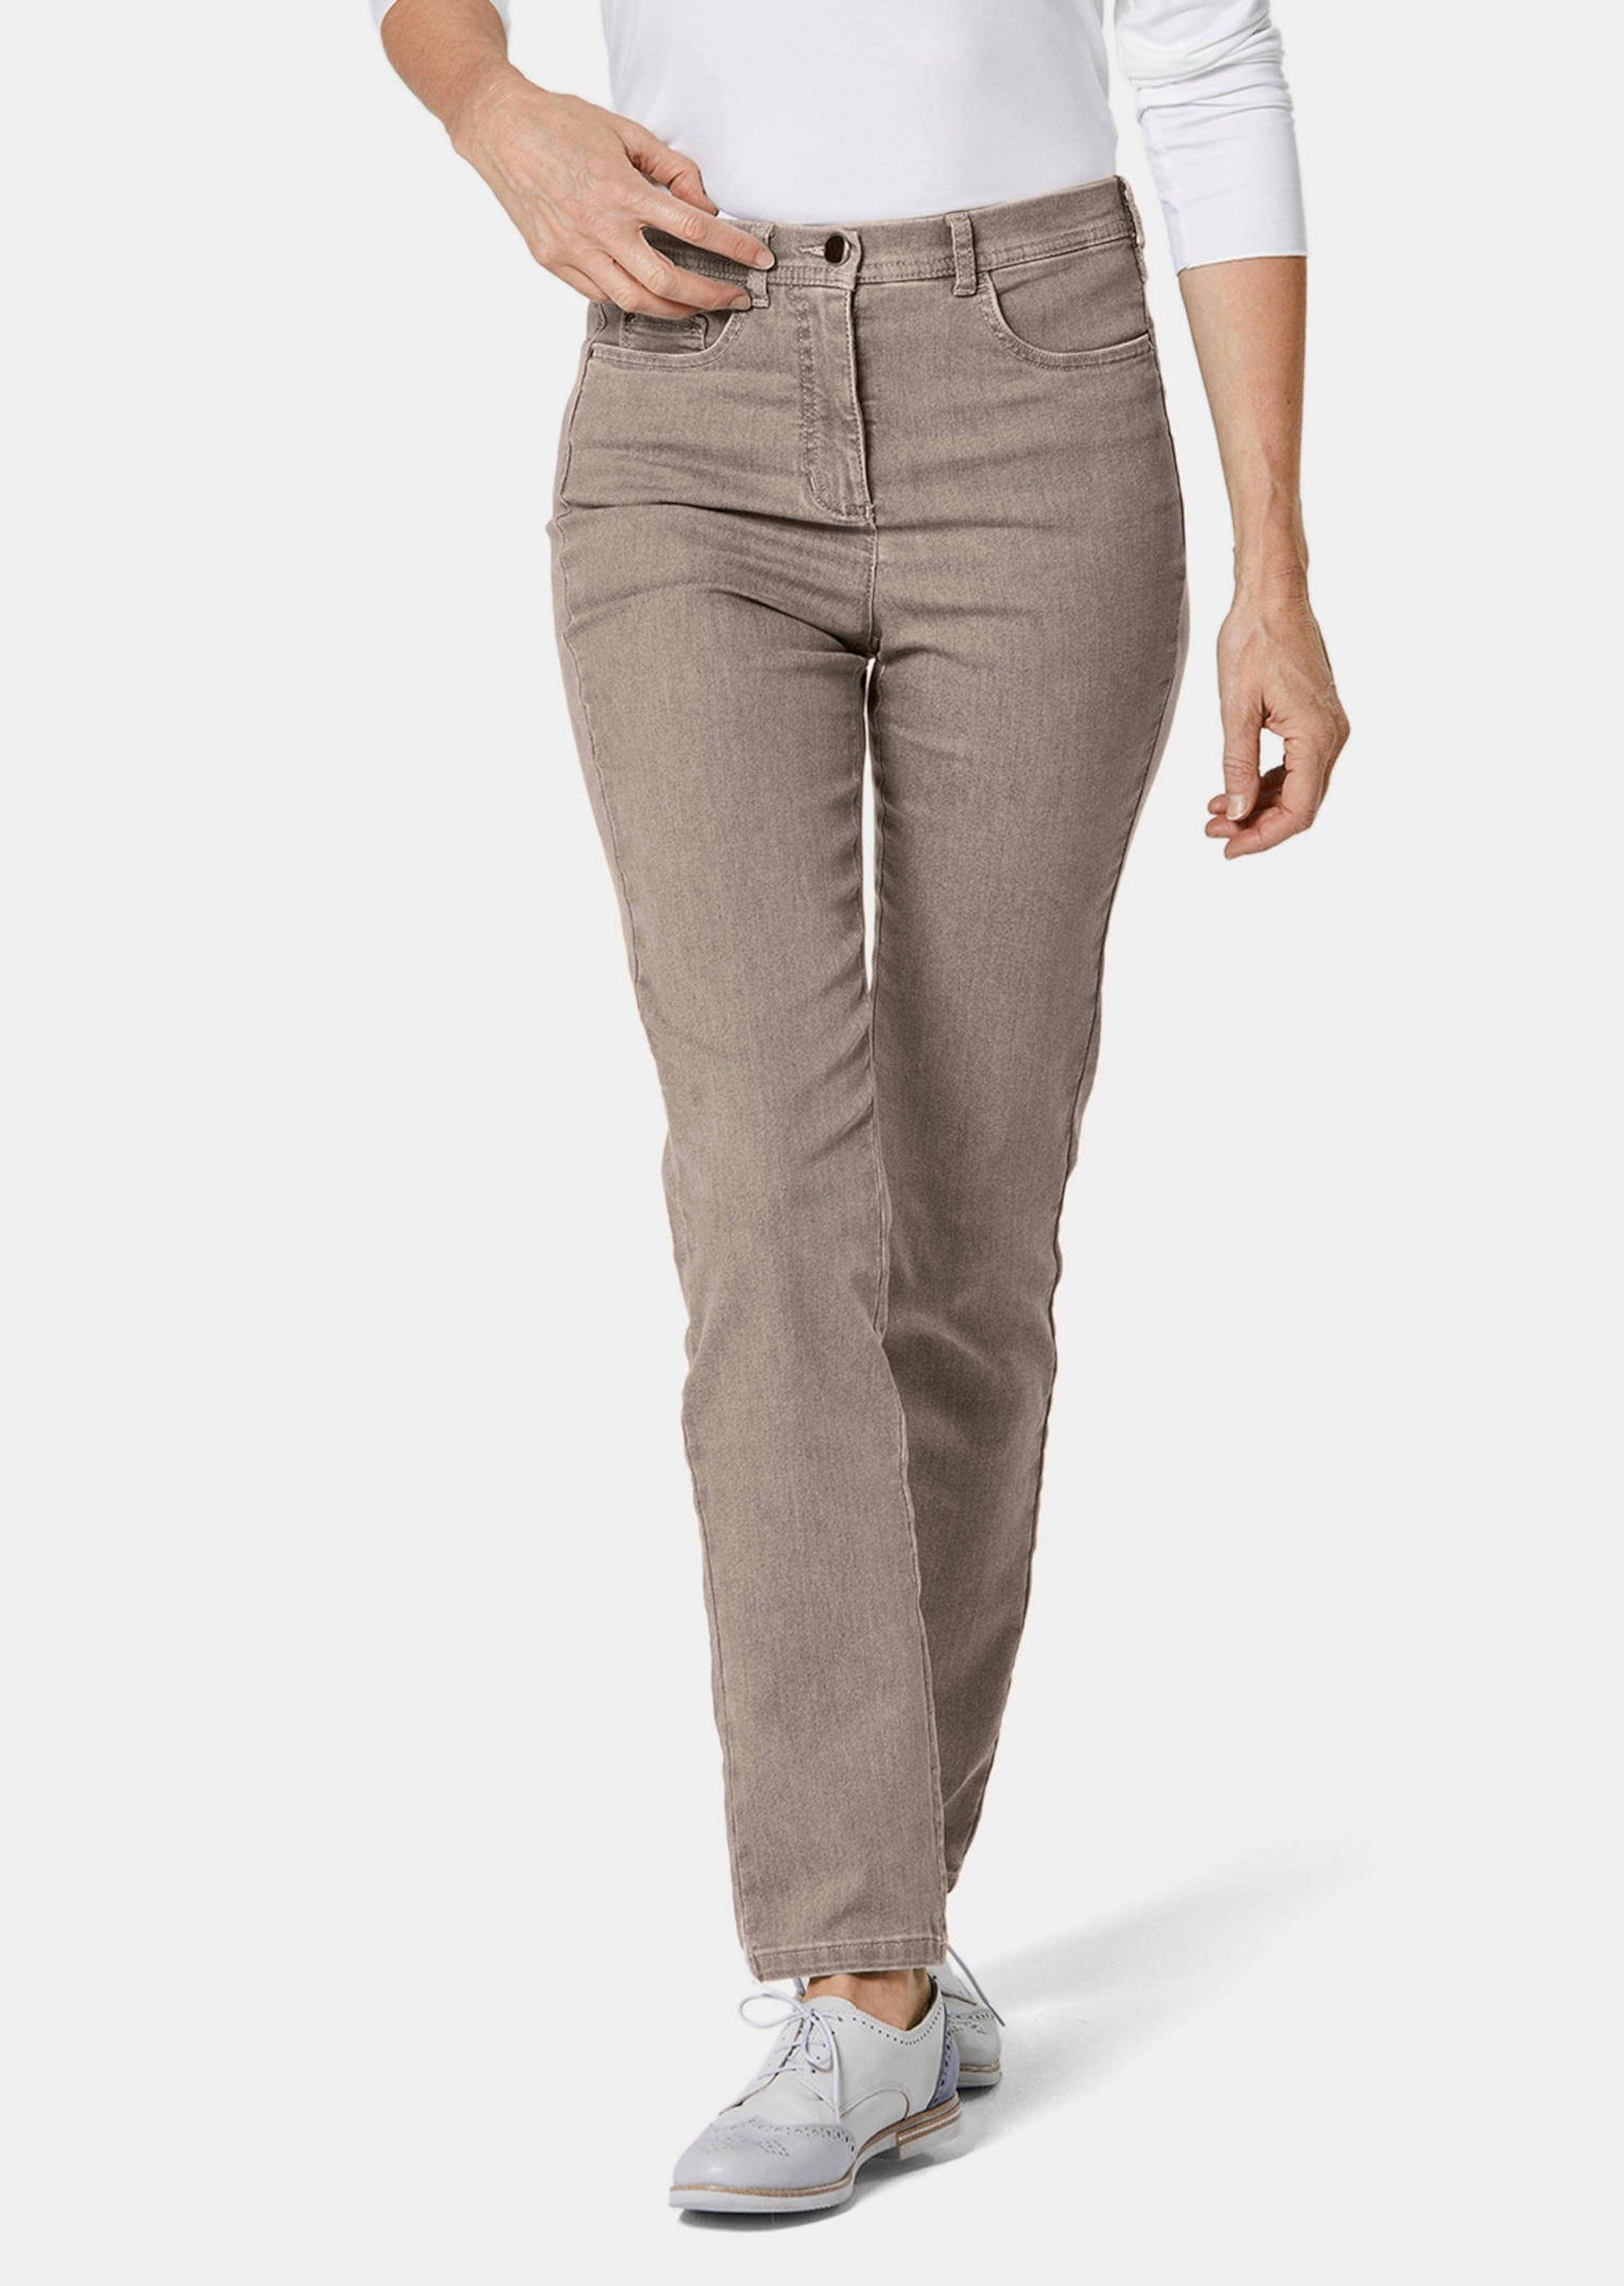 GOLDNER Bequeme Jeans Bequeme High-Stretch-Jeanshose taupe